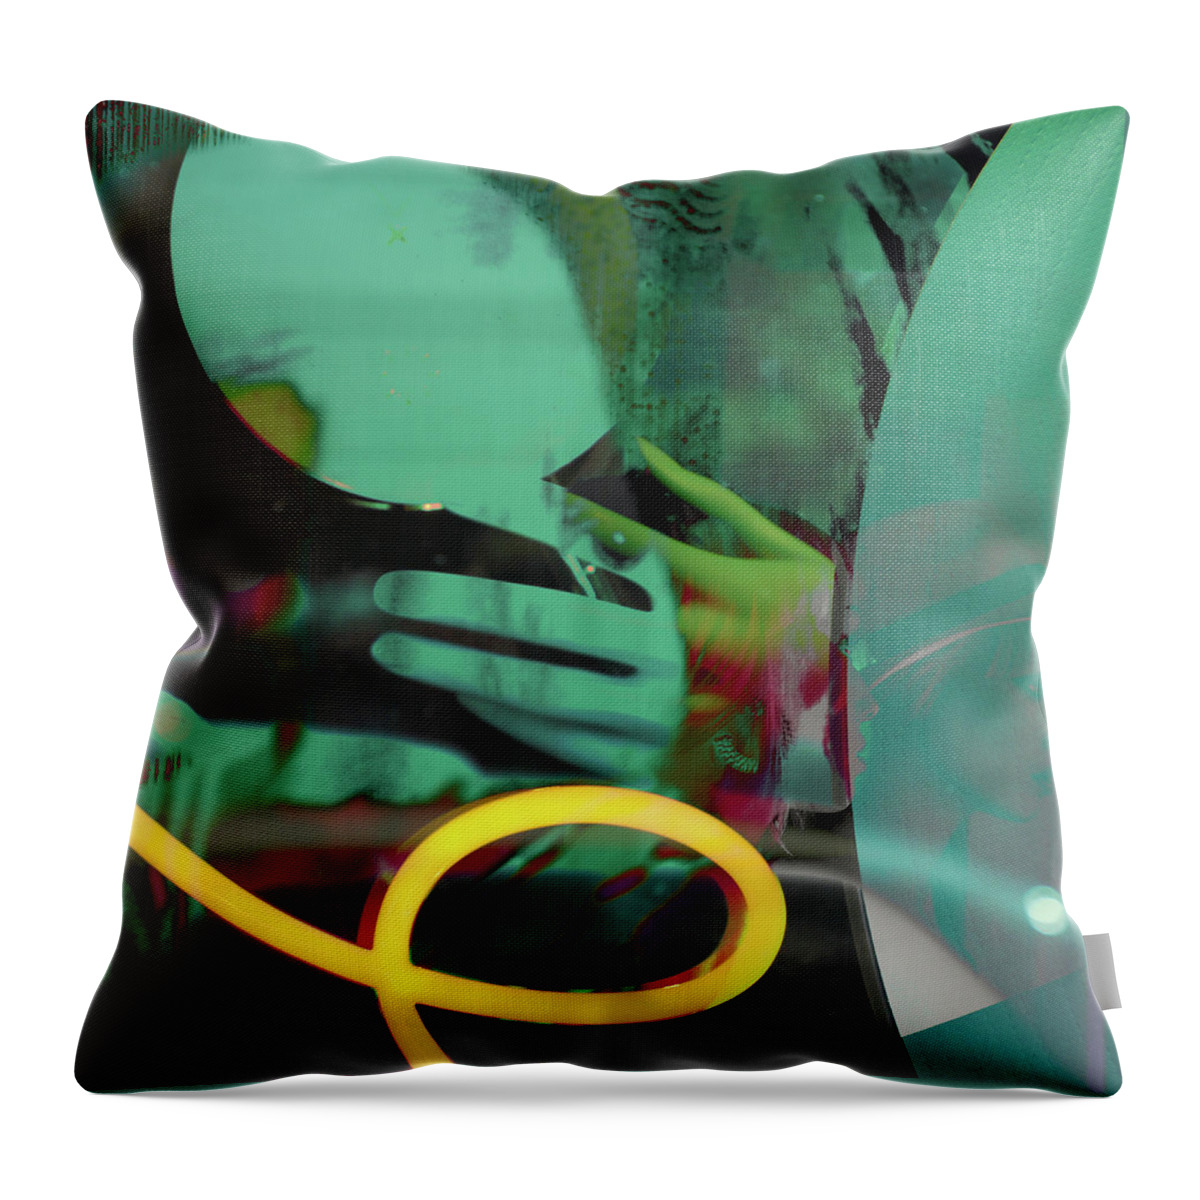 Abstract Throw Pillow featuring the photograph Hard Stop by J C